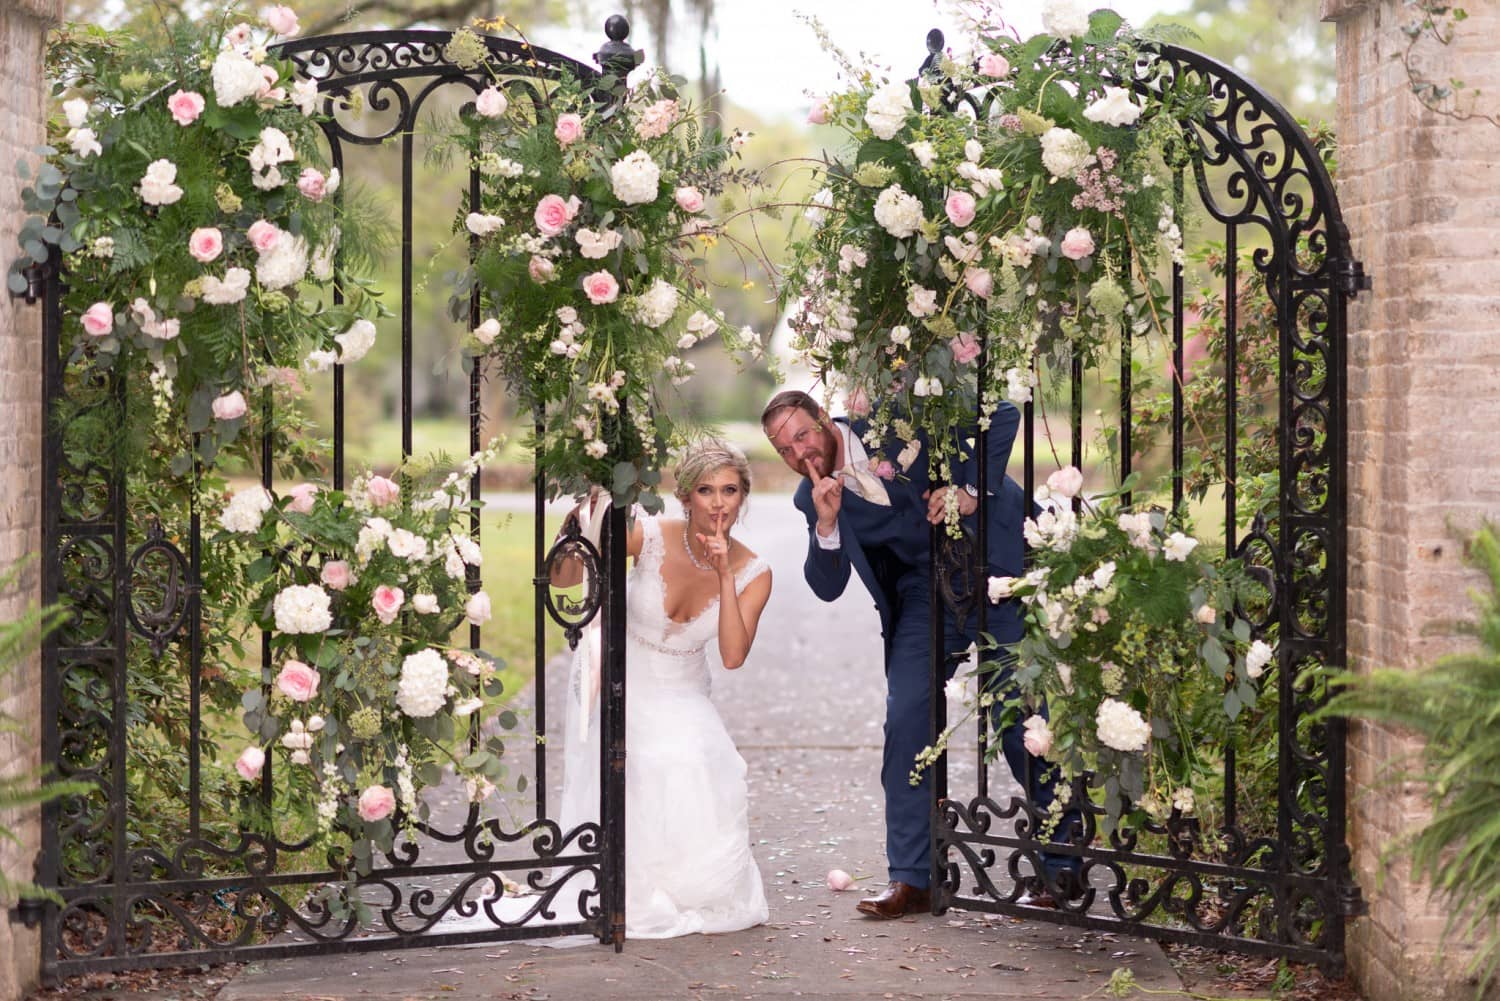 Groom and bride having fun by the gates - Brookgreen Gardens